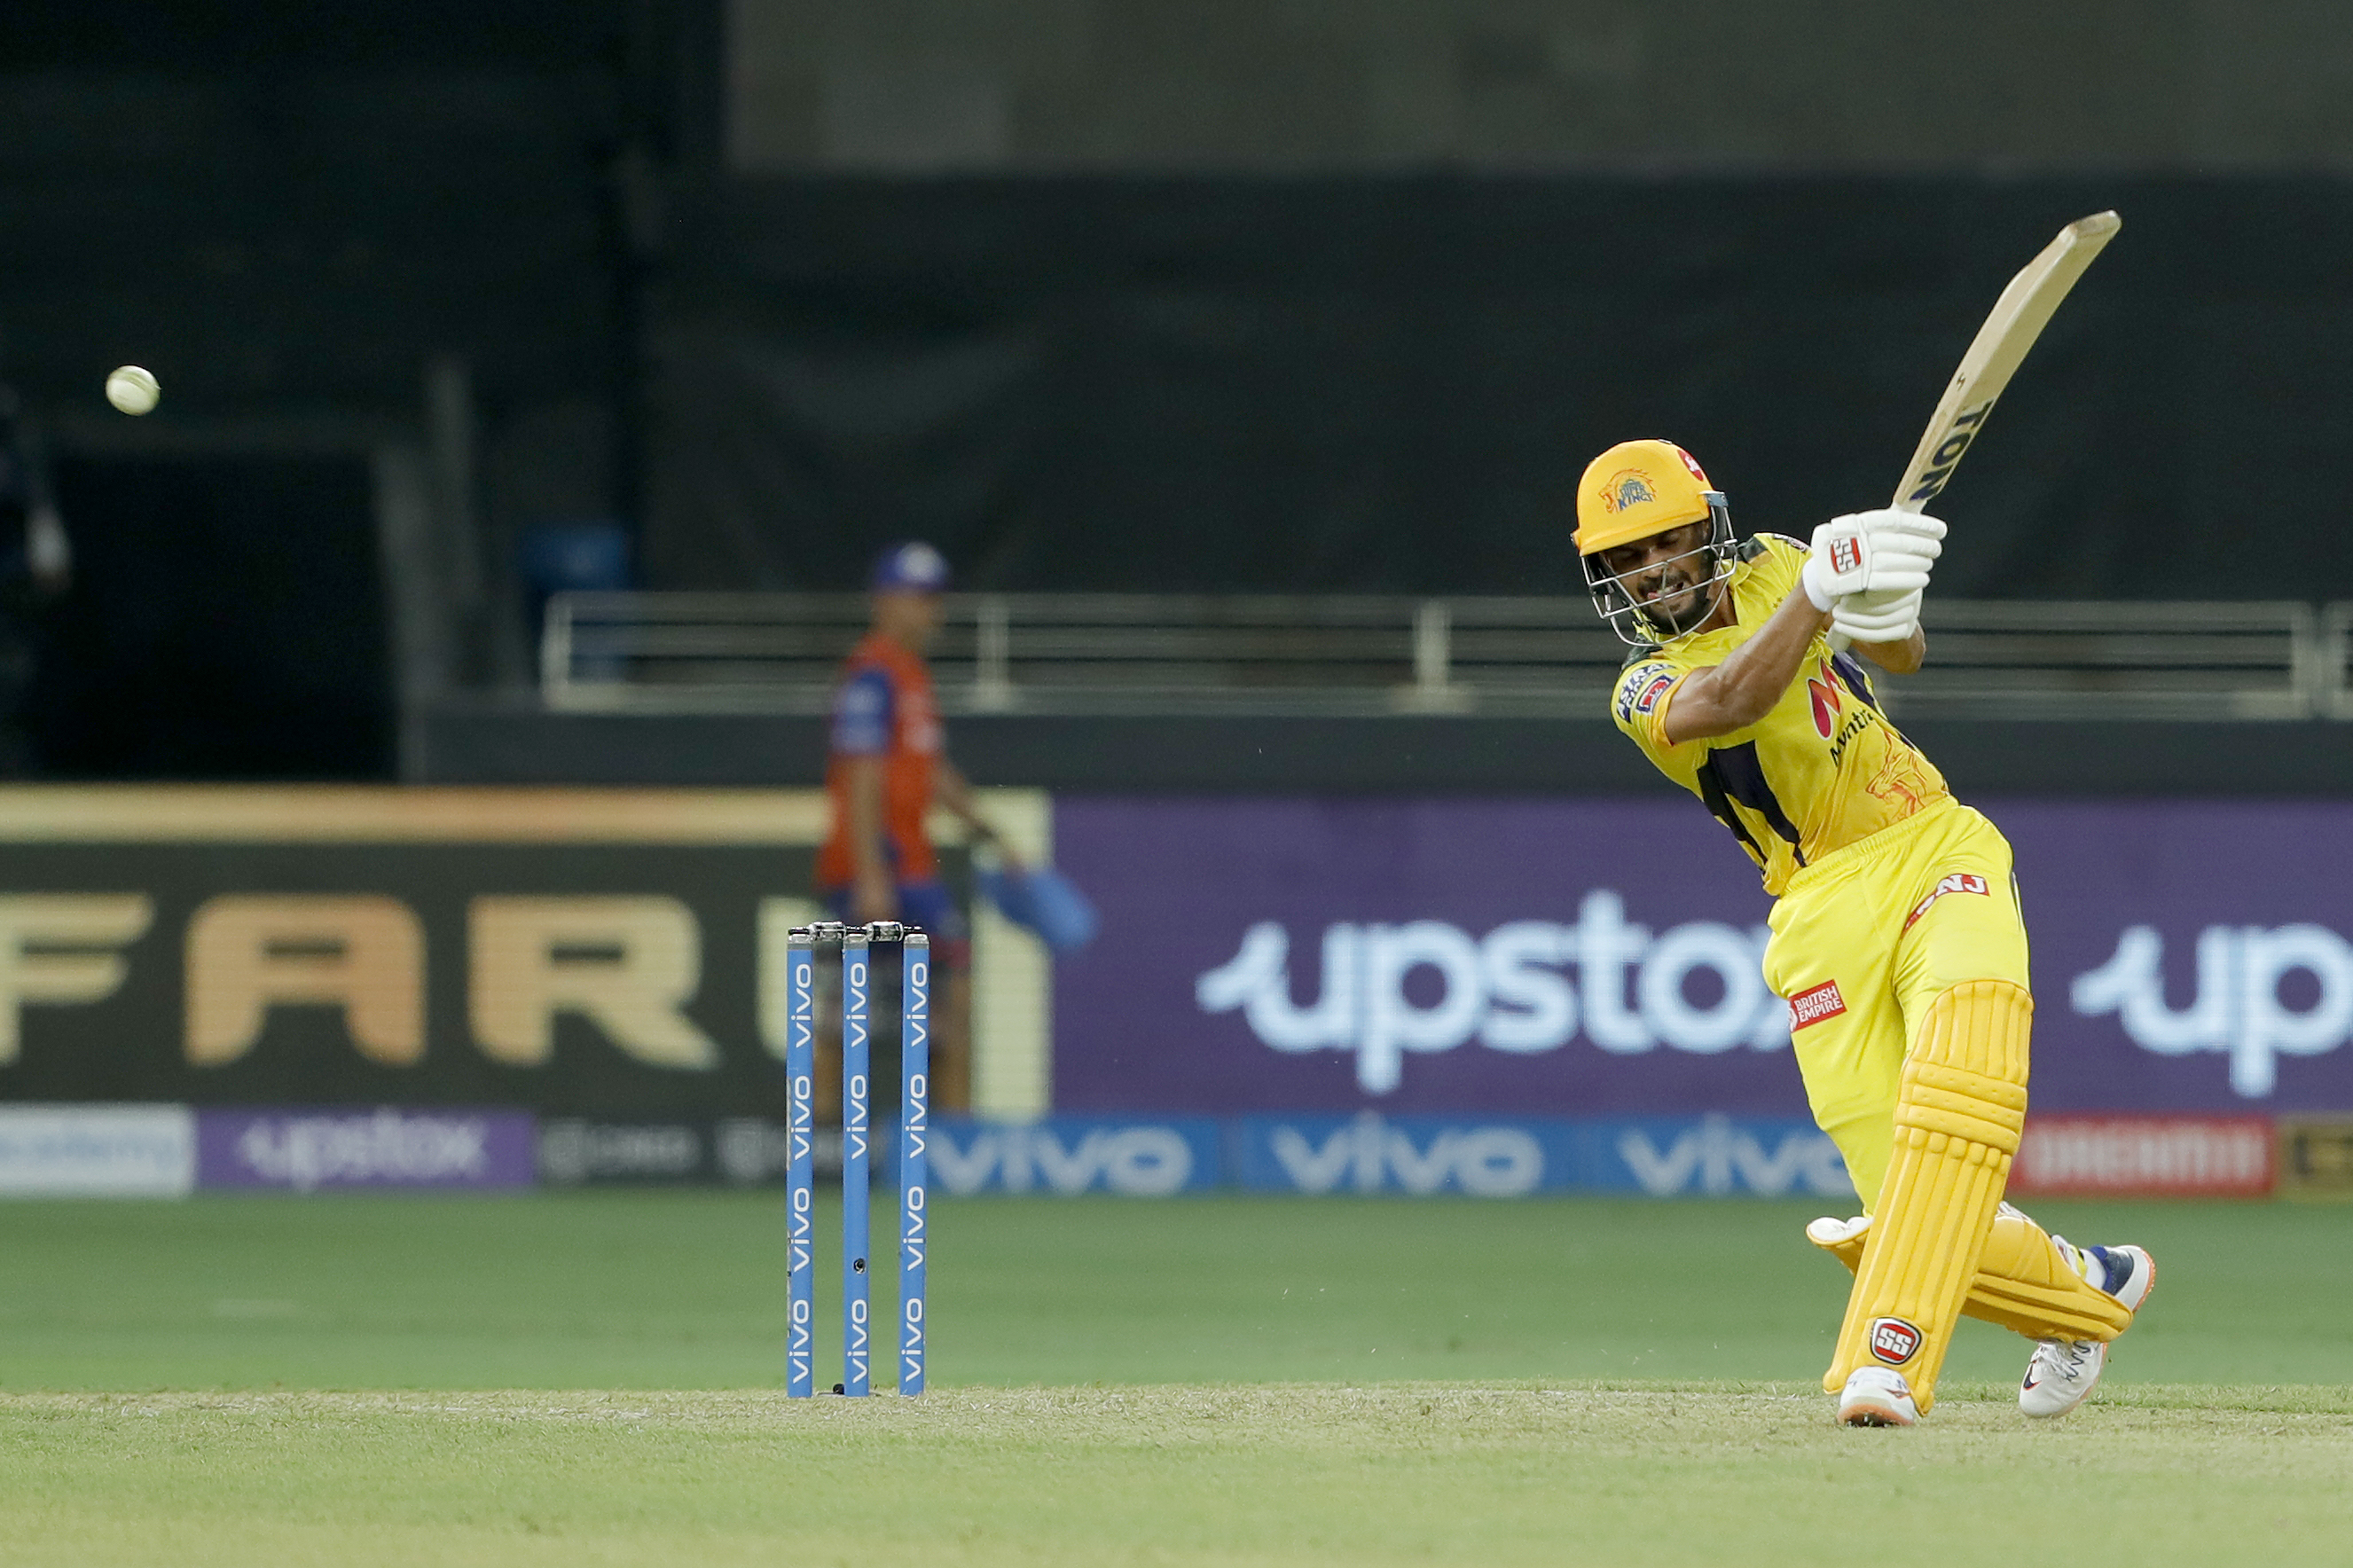 IPL 2021: Fans impressed with CSK Skipper MS Dhoni's DRS calls